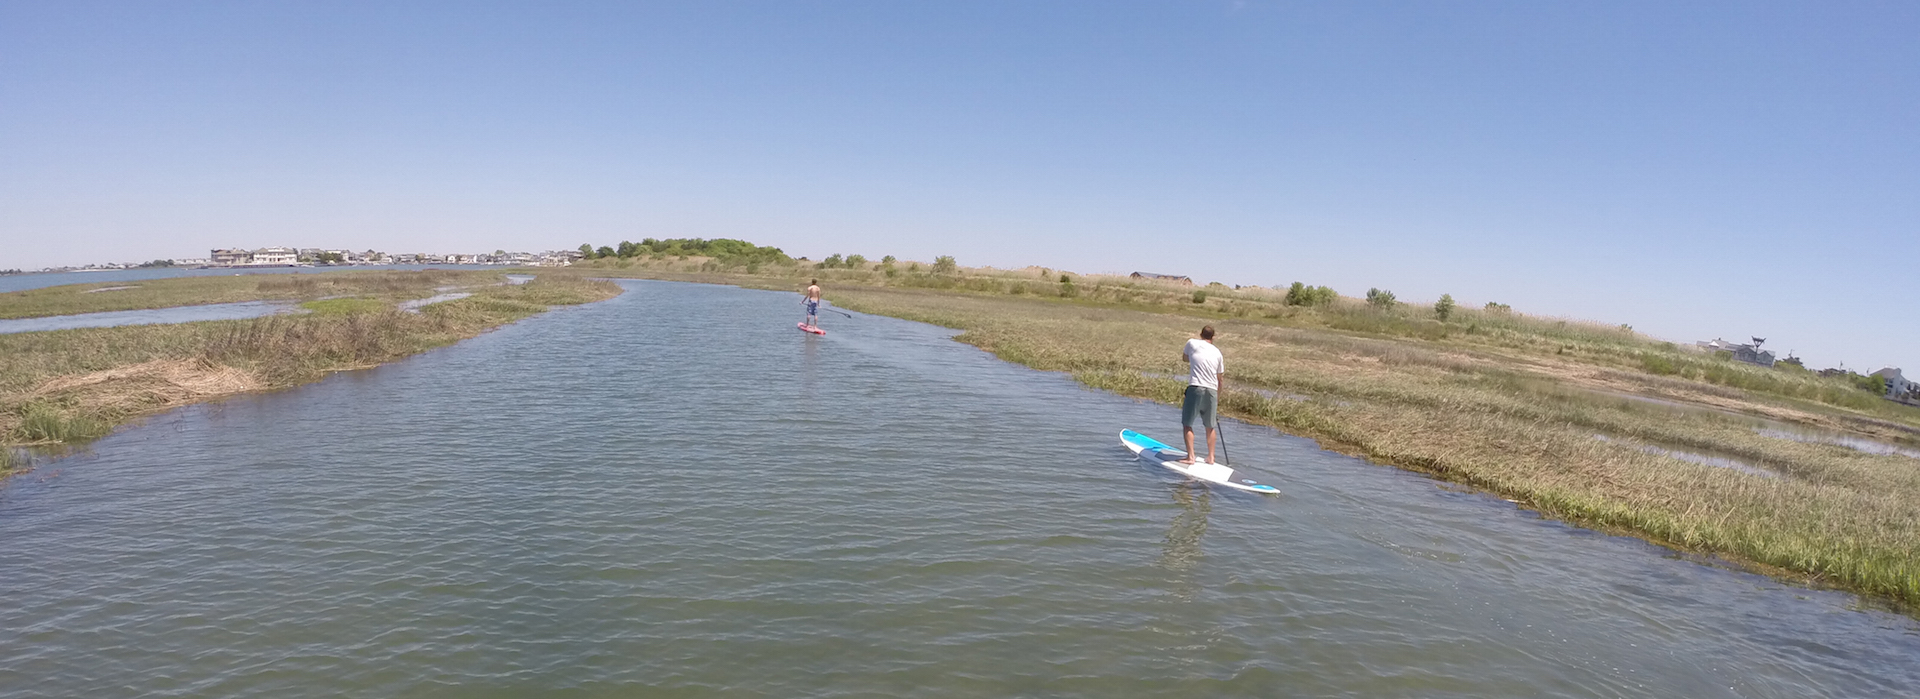 stand up paddle board volume